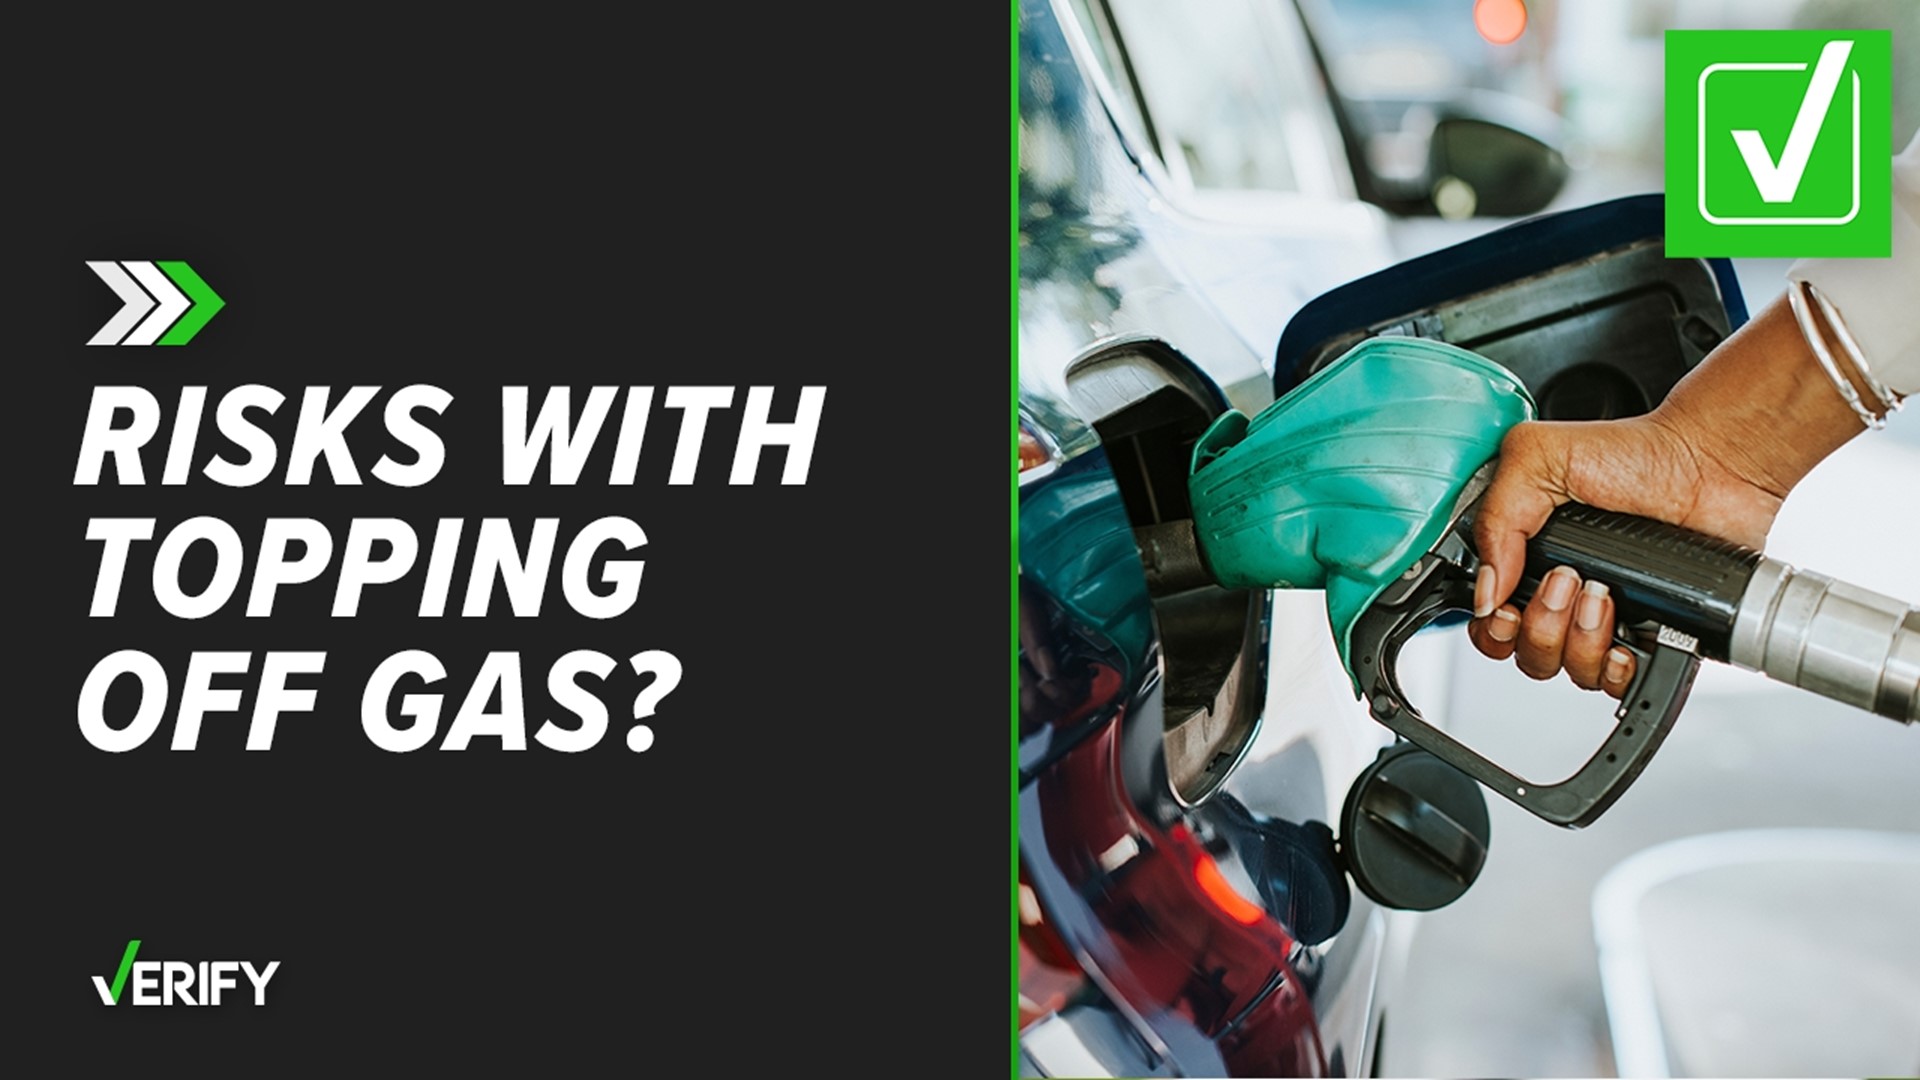 Any gas you add after the fuel pump clicks risks overfilling your fuel tank. That could damage your car.